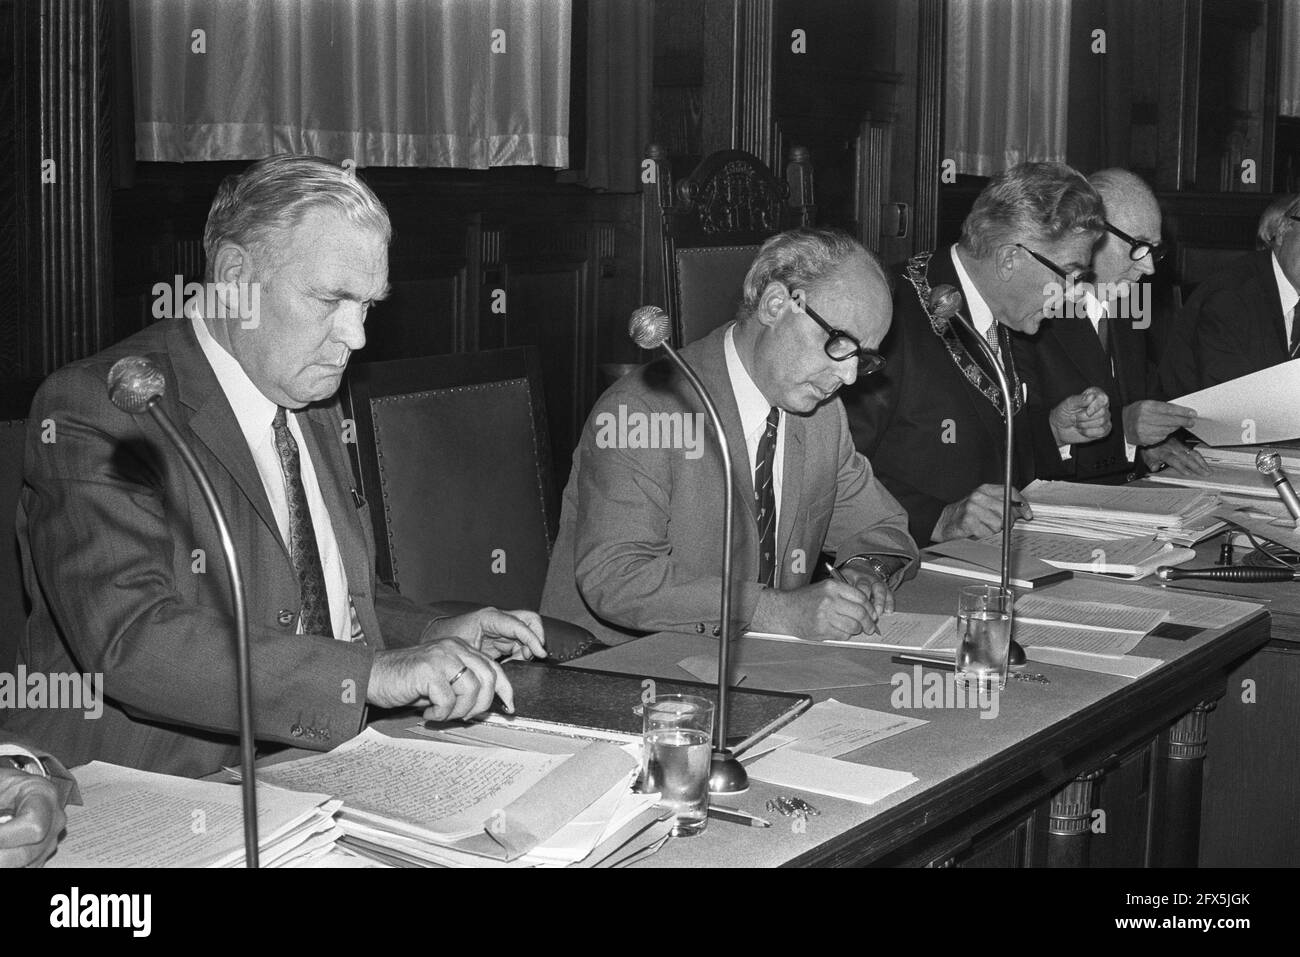 Rotterdam City Council meeting, 4a (l) G.Z. de Vos (KVP), W. Thomassen, 5, 6, 6a (l) alderman H.W. Jettinghoff (PvdA), September 2, 1971, City Council meetings, aldermen, The Netherlands, 20th century press agency photo, news to remember, documentary, historic photography 1945-1990, visual stories, human history of the Twentieth Century, capturing moments in time Stock Photo